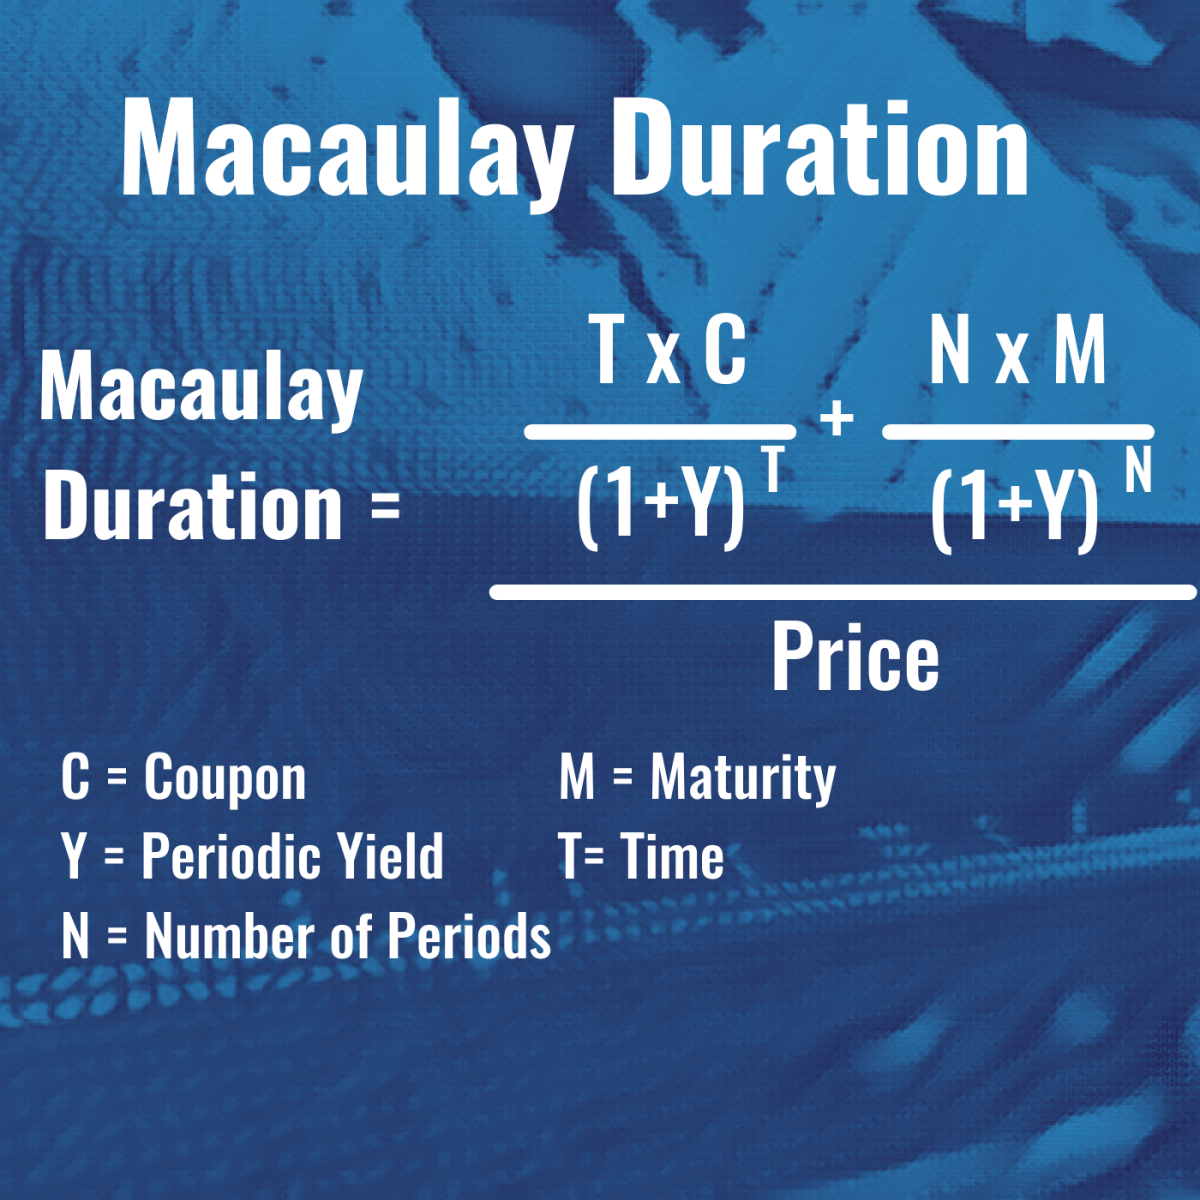 This is the formula used to calculate Macaulay Duration